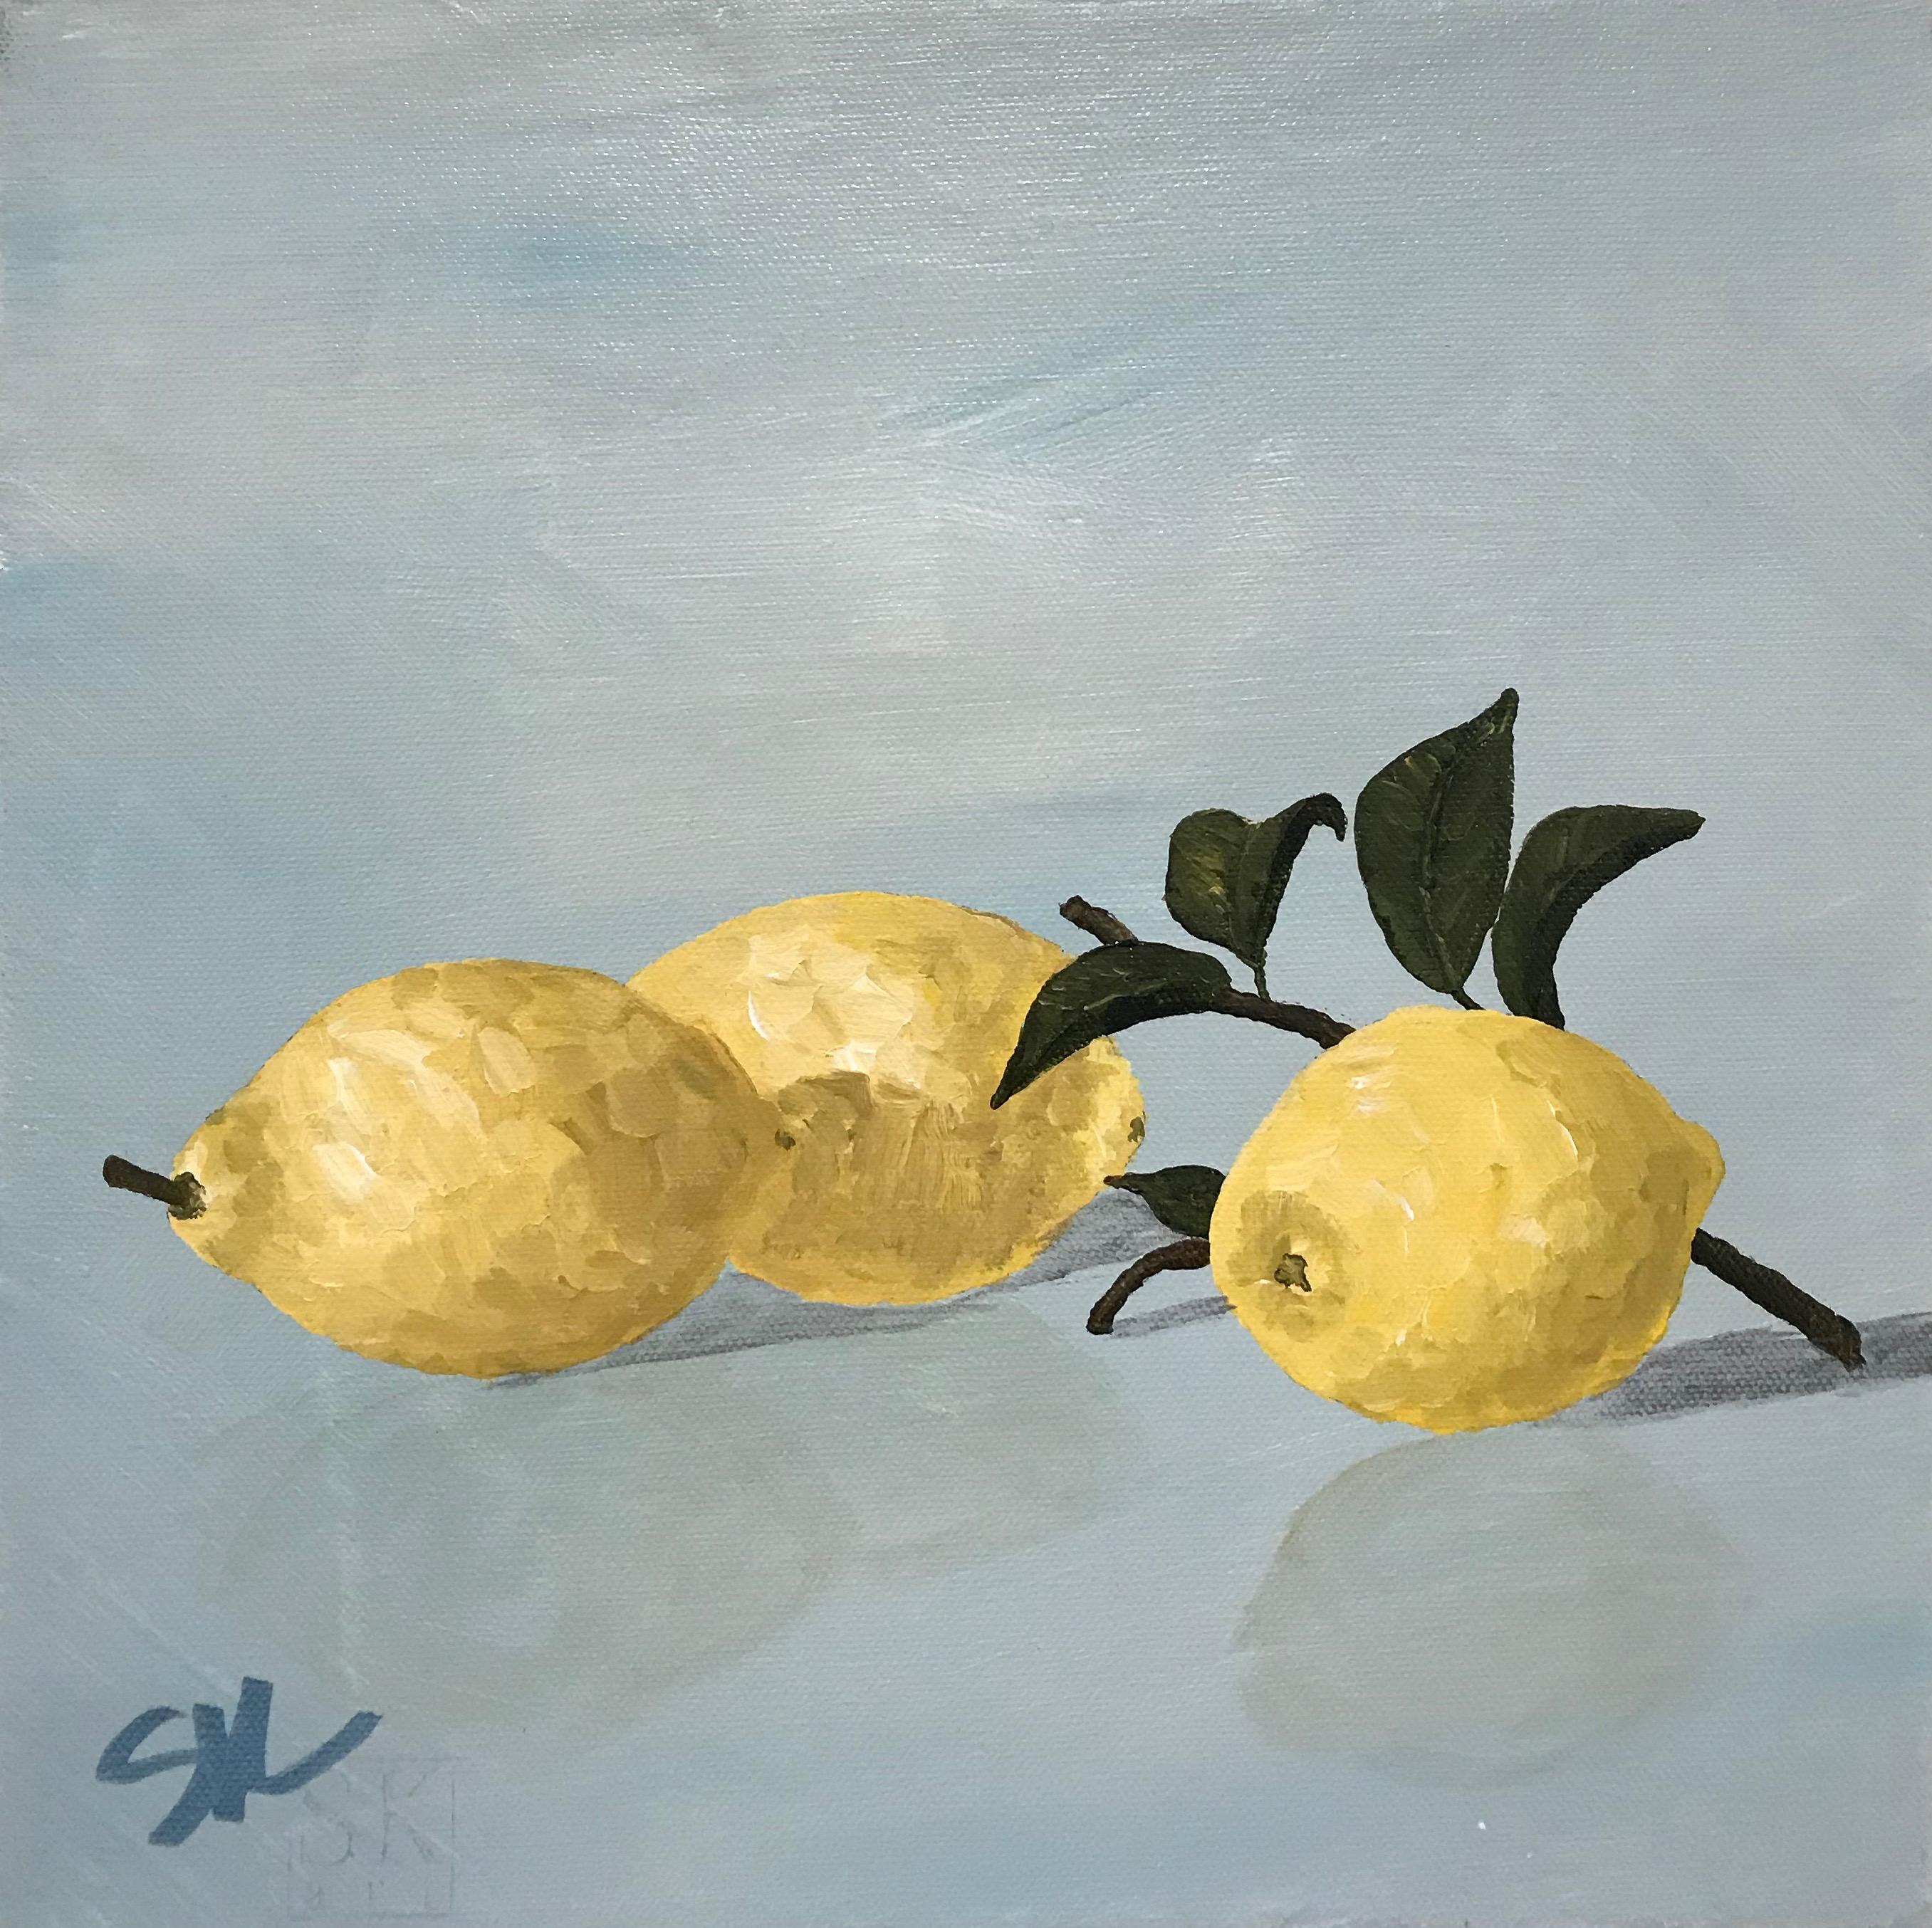 Susan Kinsella Landscape Painting - Lemons II, Small Square Contemporary Still Life on Canvas